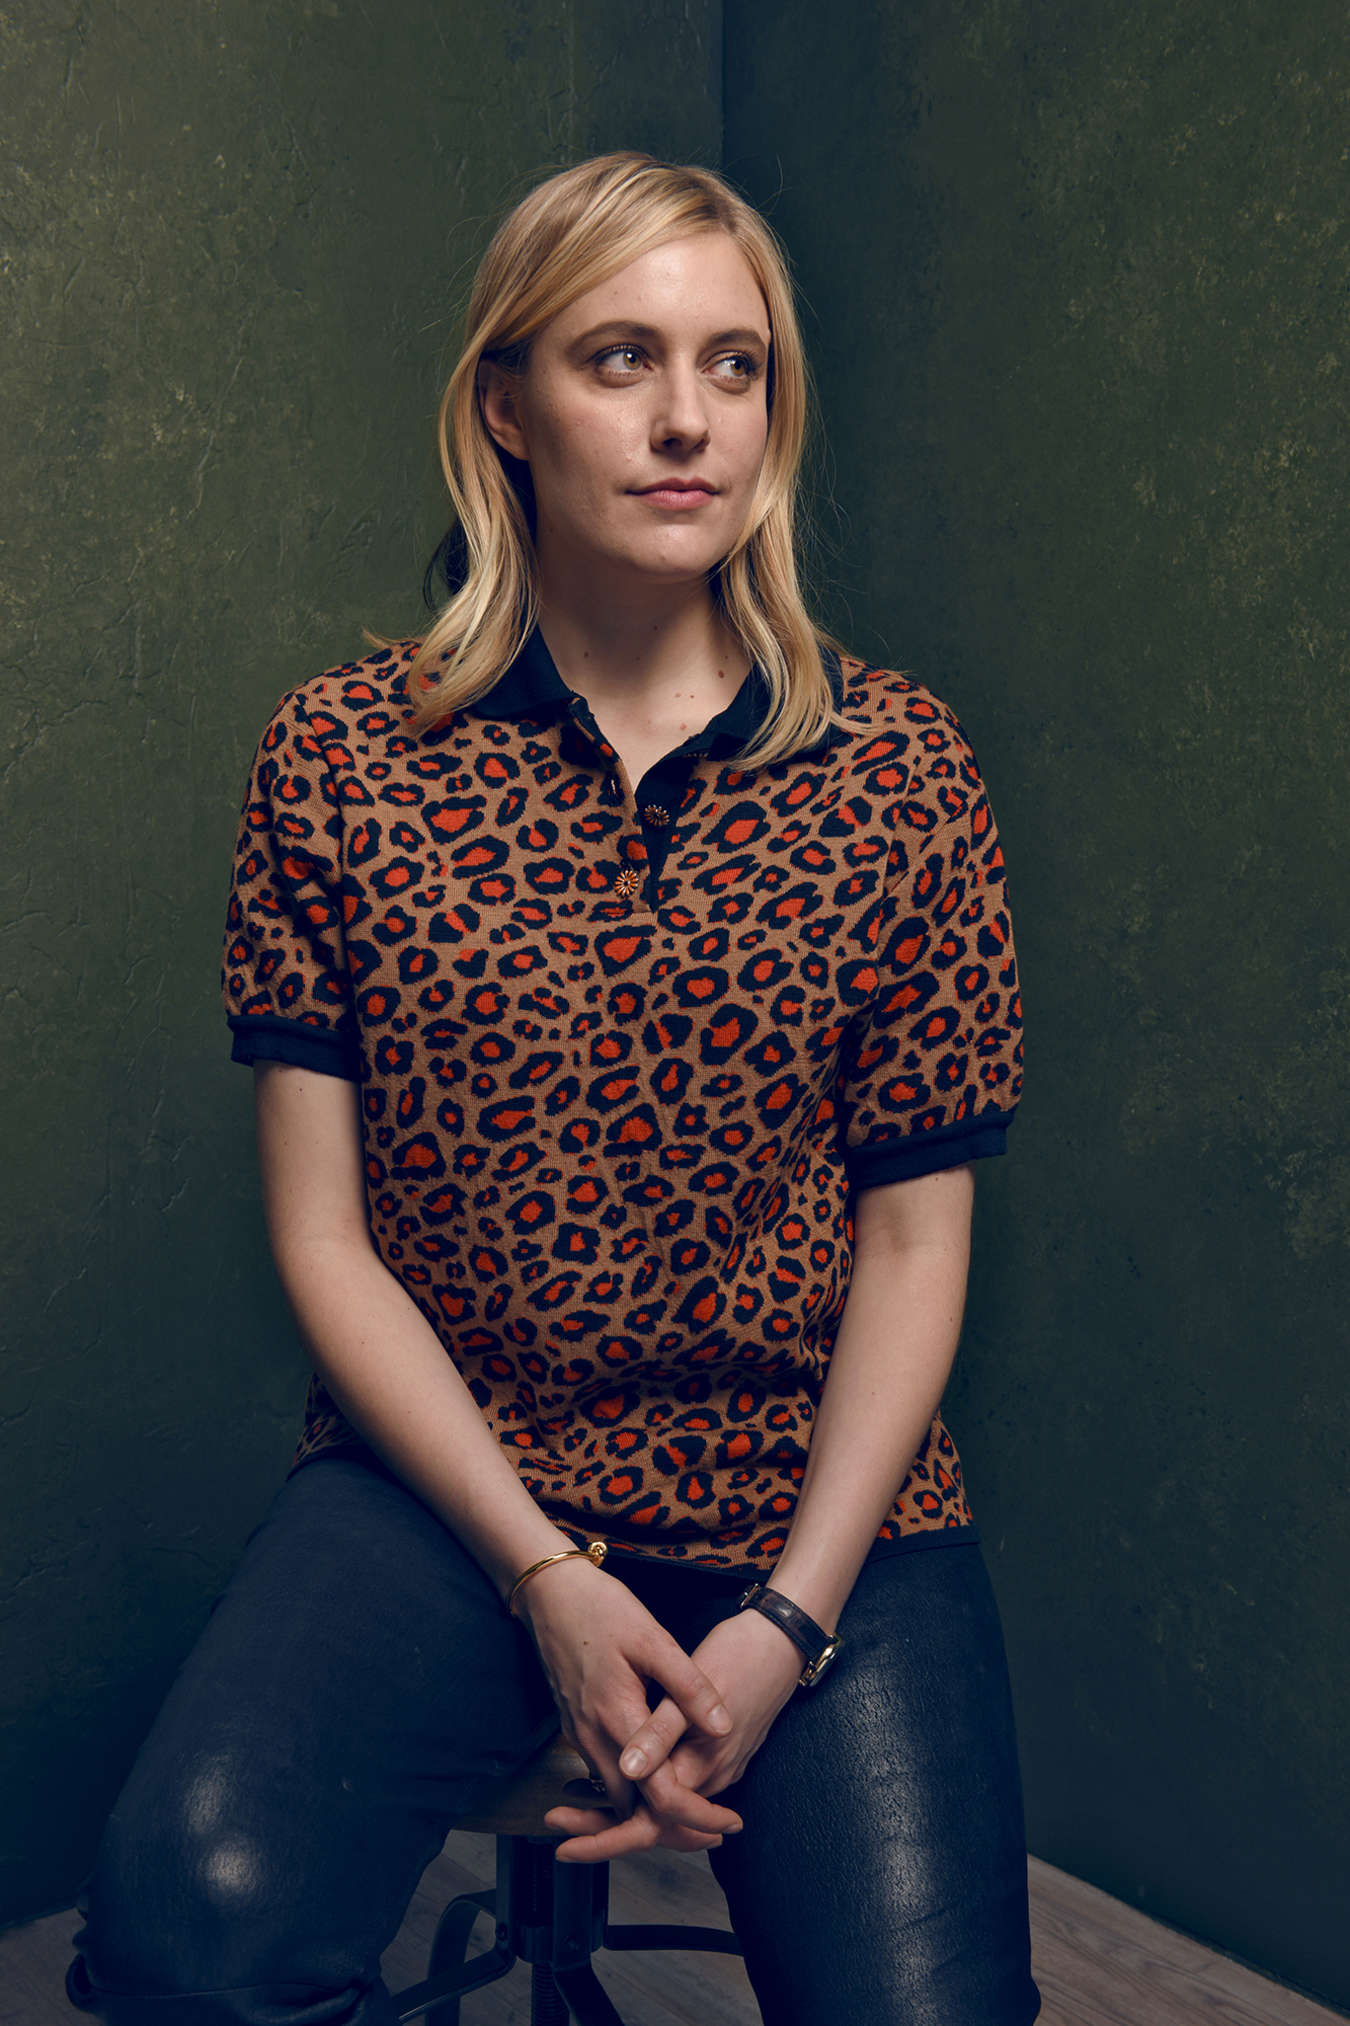 Greta Gerwig at a photocall for the film Mrs Americ